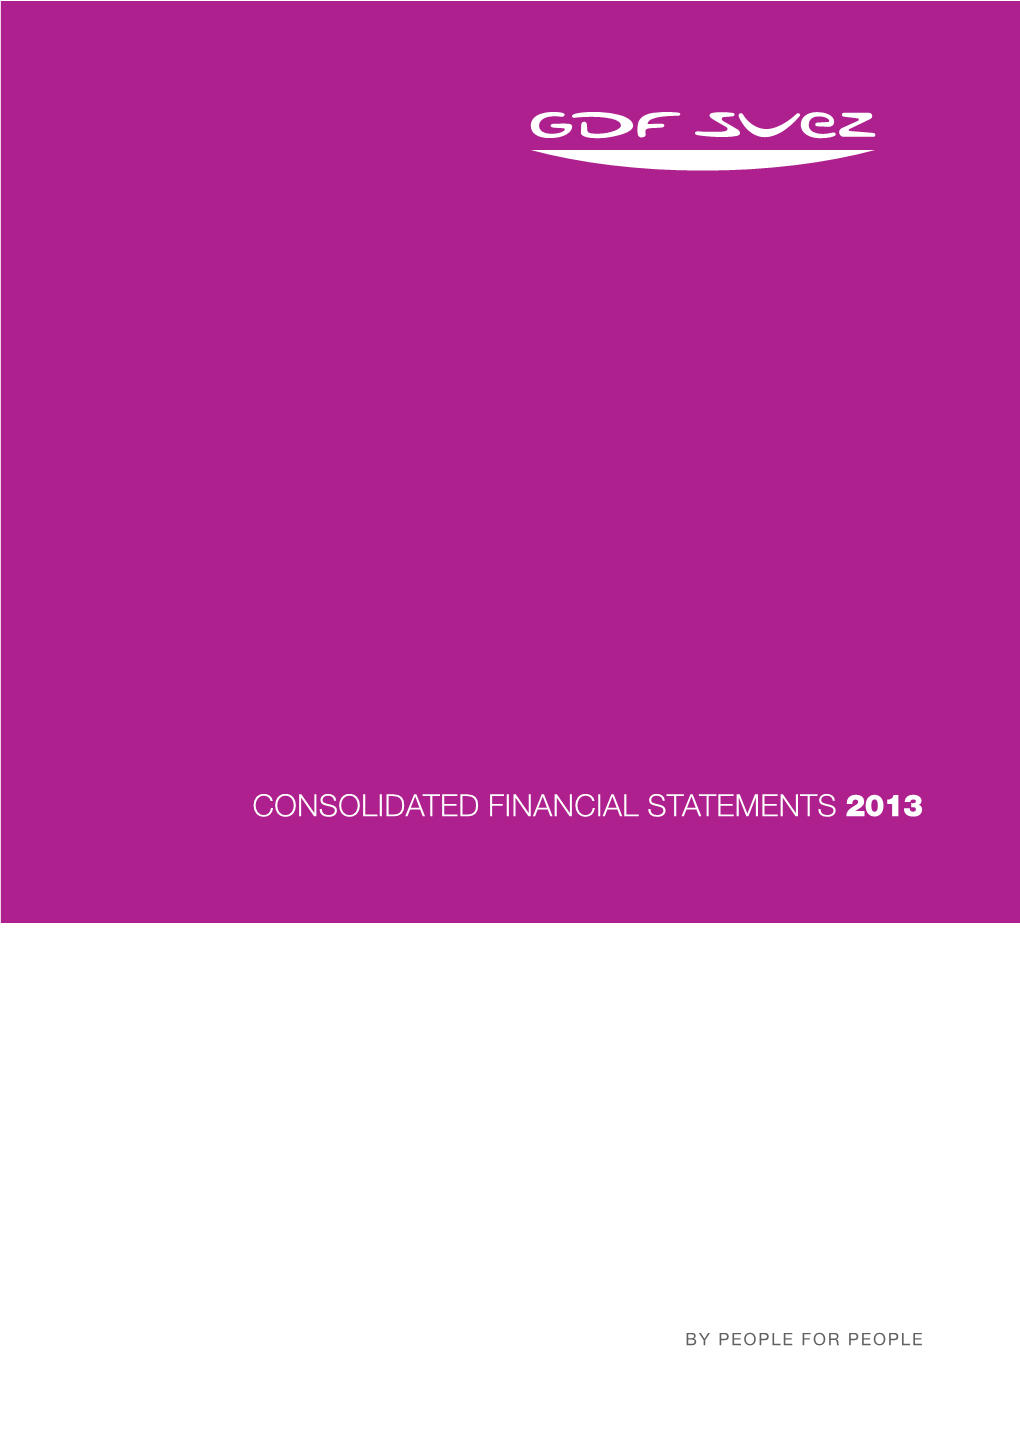 2013 Consolidated Financial Statements and Activities Report